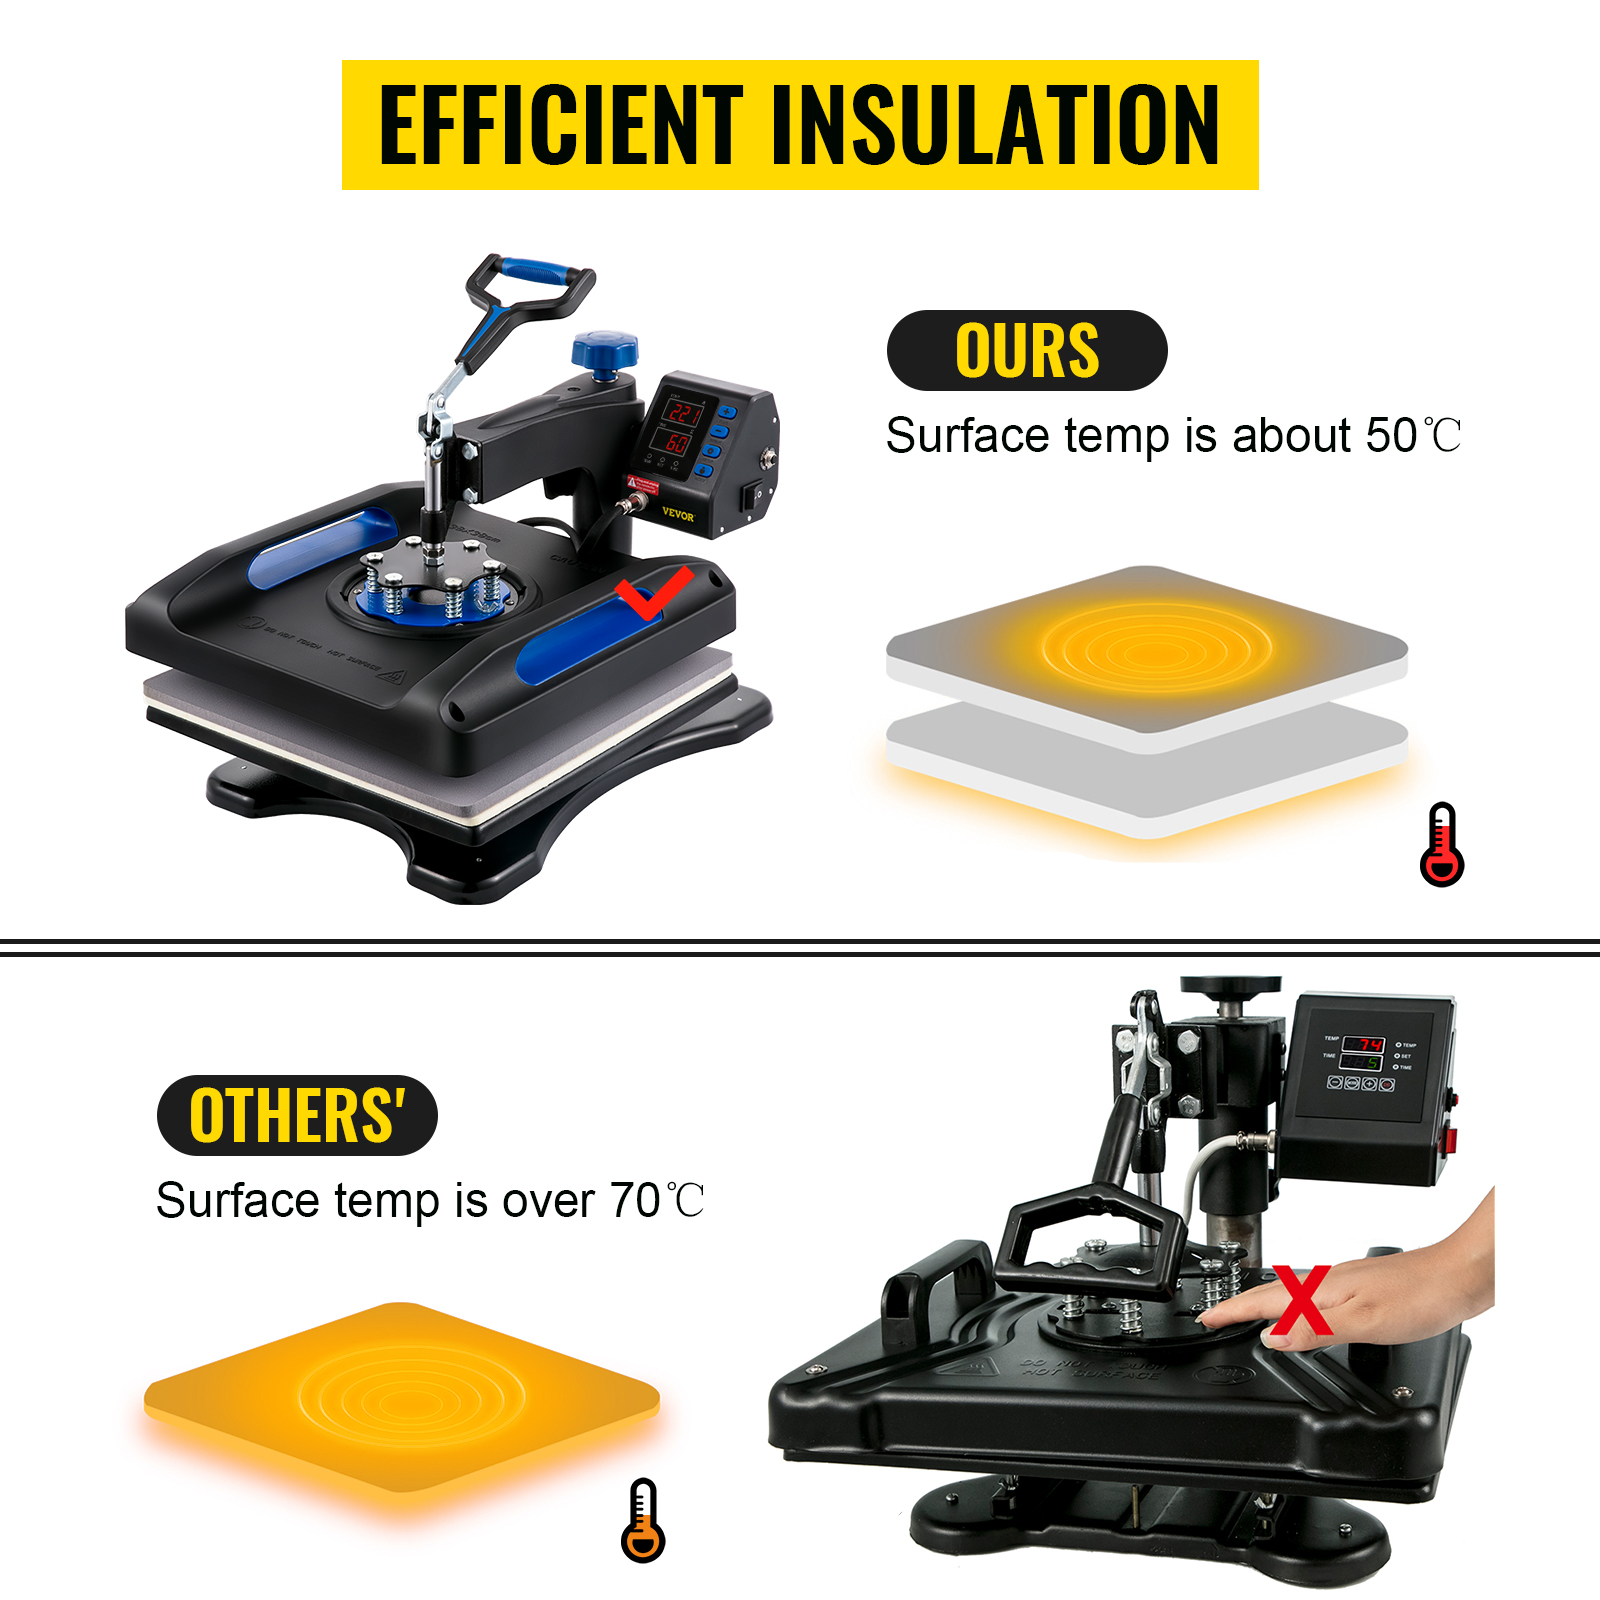  Heat Press Machine 15x15in, Assemble 5 in 1, Fast-Heating, 360  Swing Away, Digital Control Multifunction Sublimation Combo, Blue : Arts,  Crafts & Sewing